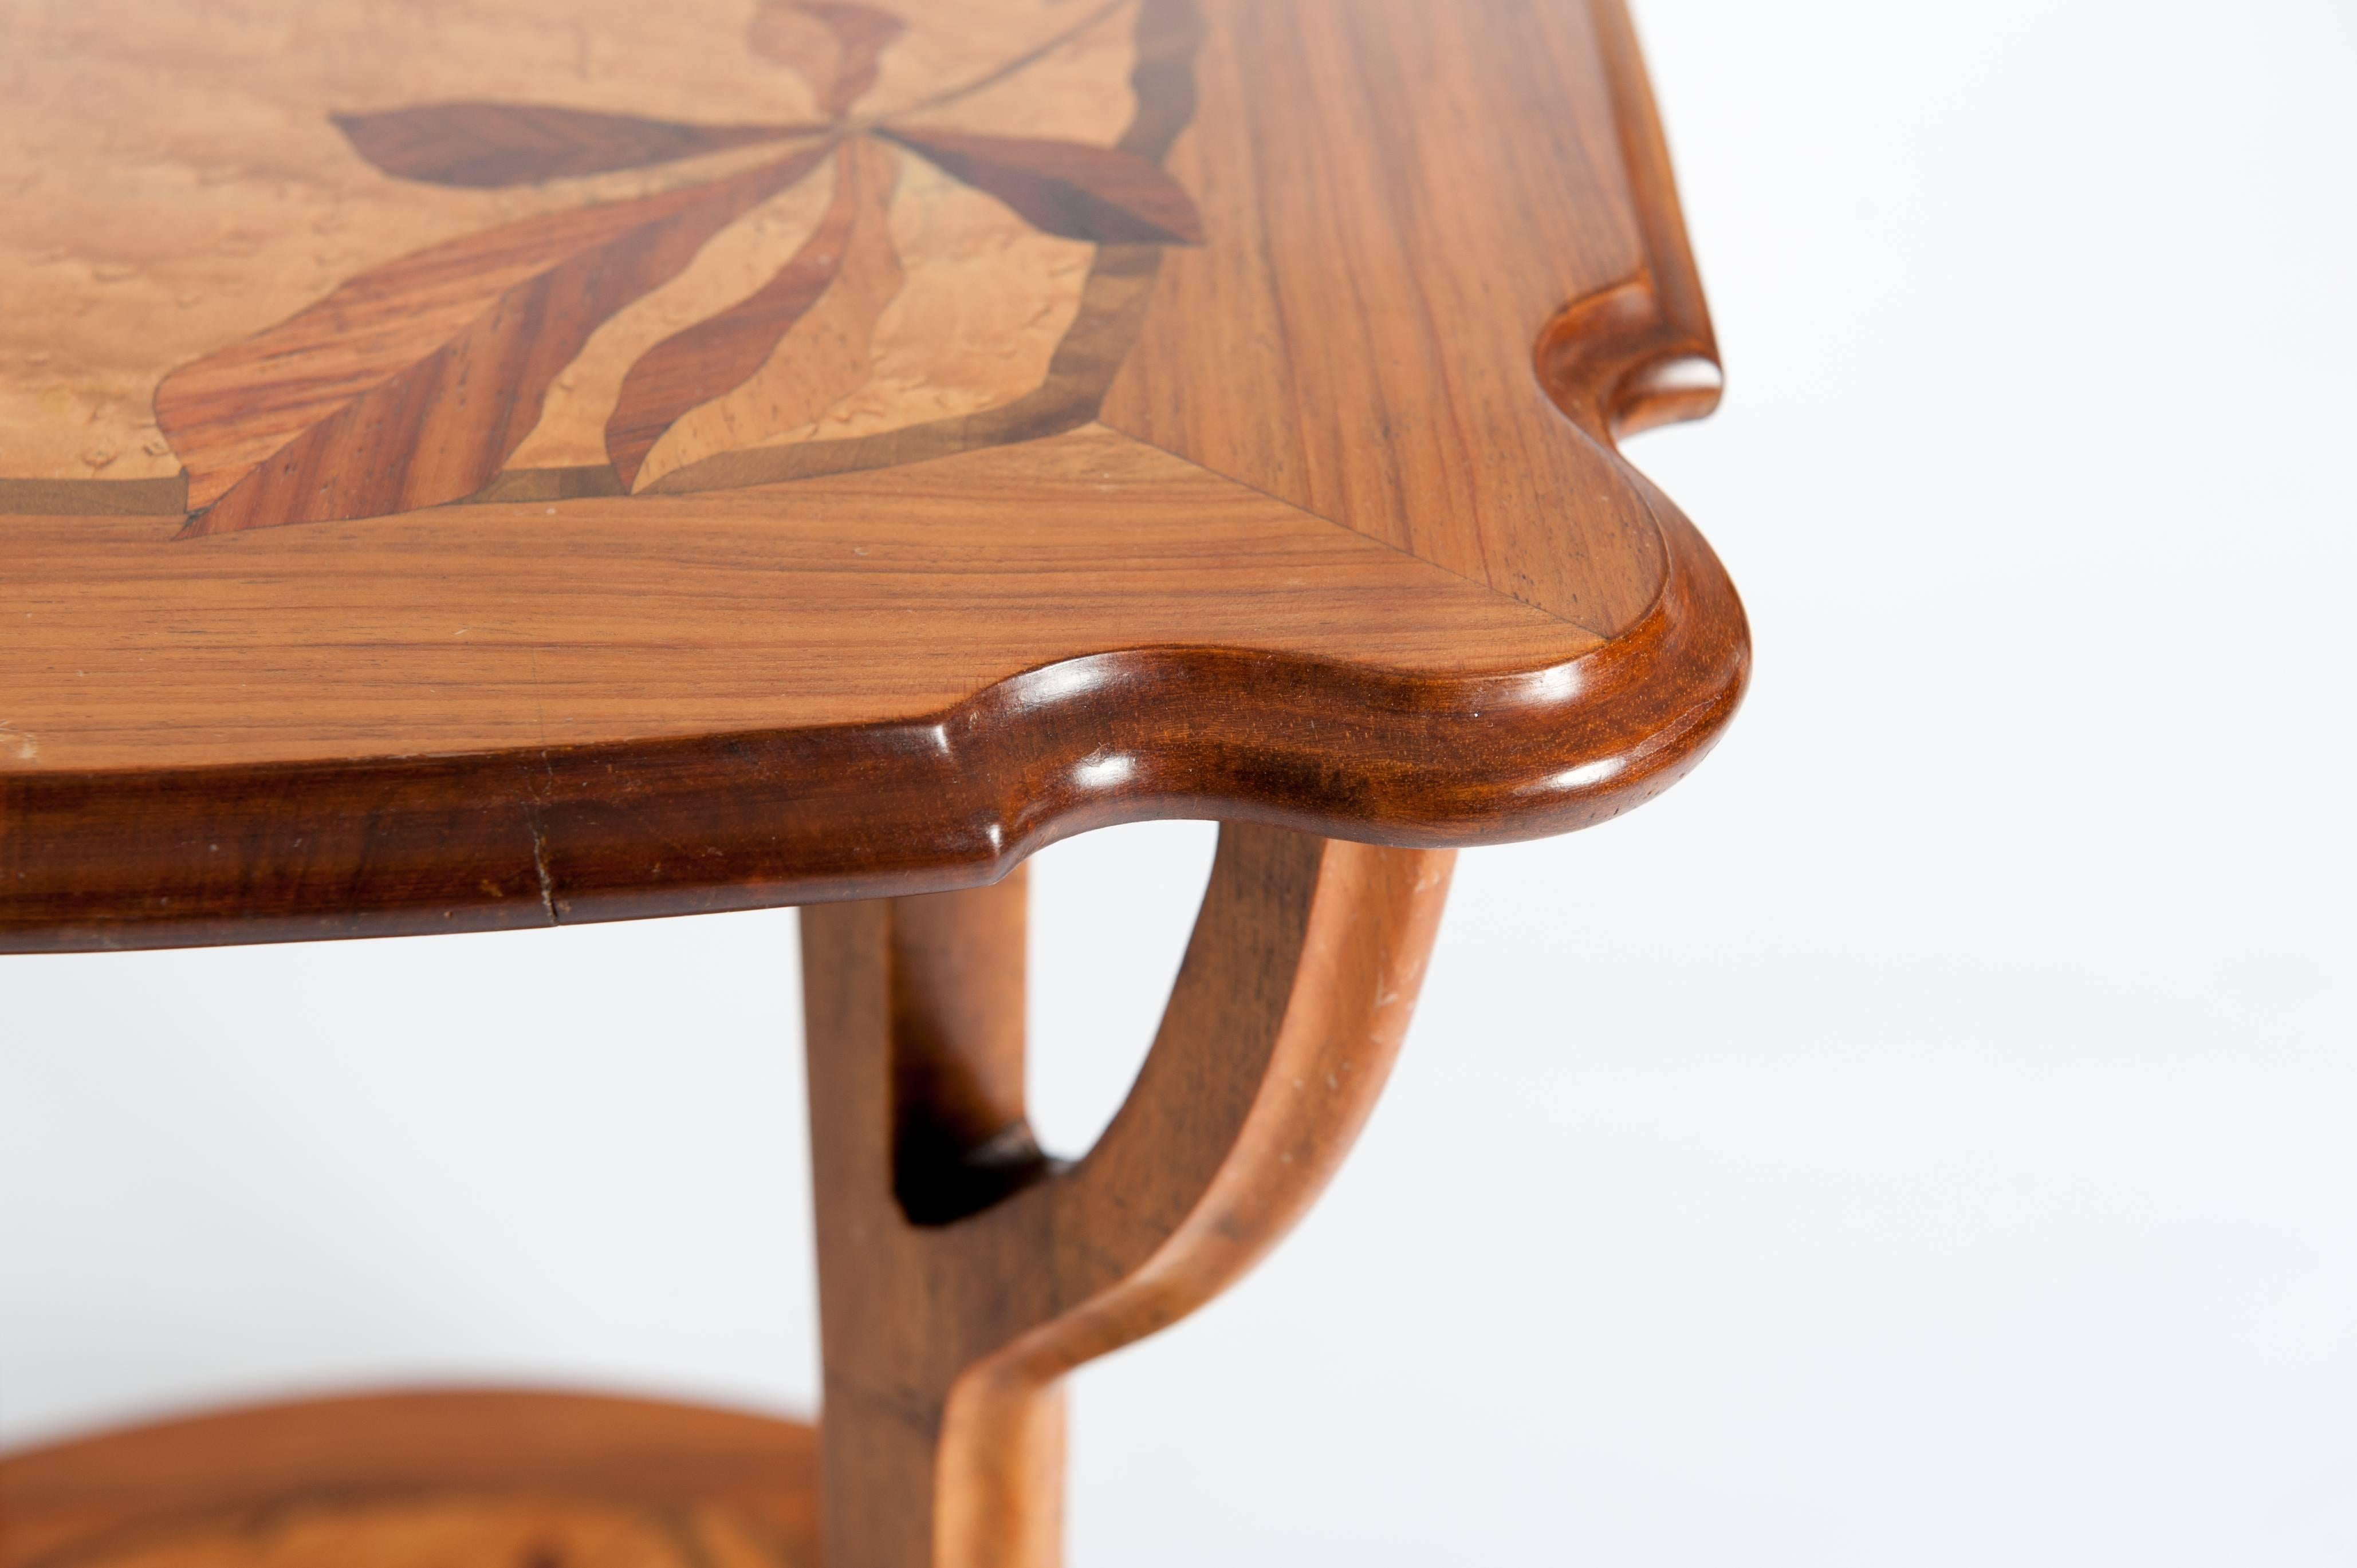 Boxwood French Art Nouveau Table Gueridon Rosewood with Inlays from Edouard Diot